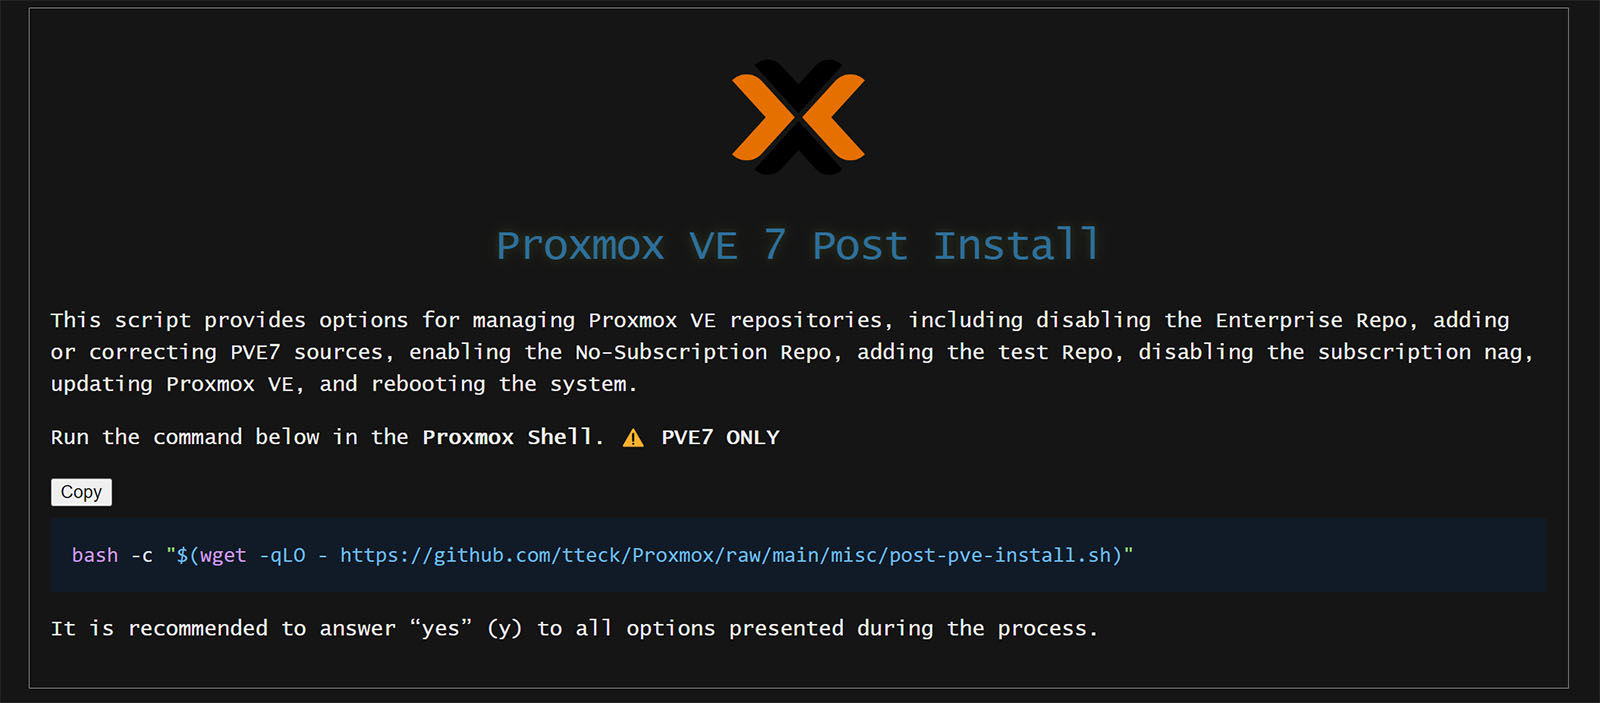 Proxmox Home Assistant Post Install Clean up and optimization